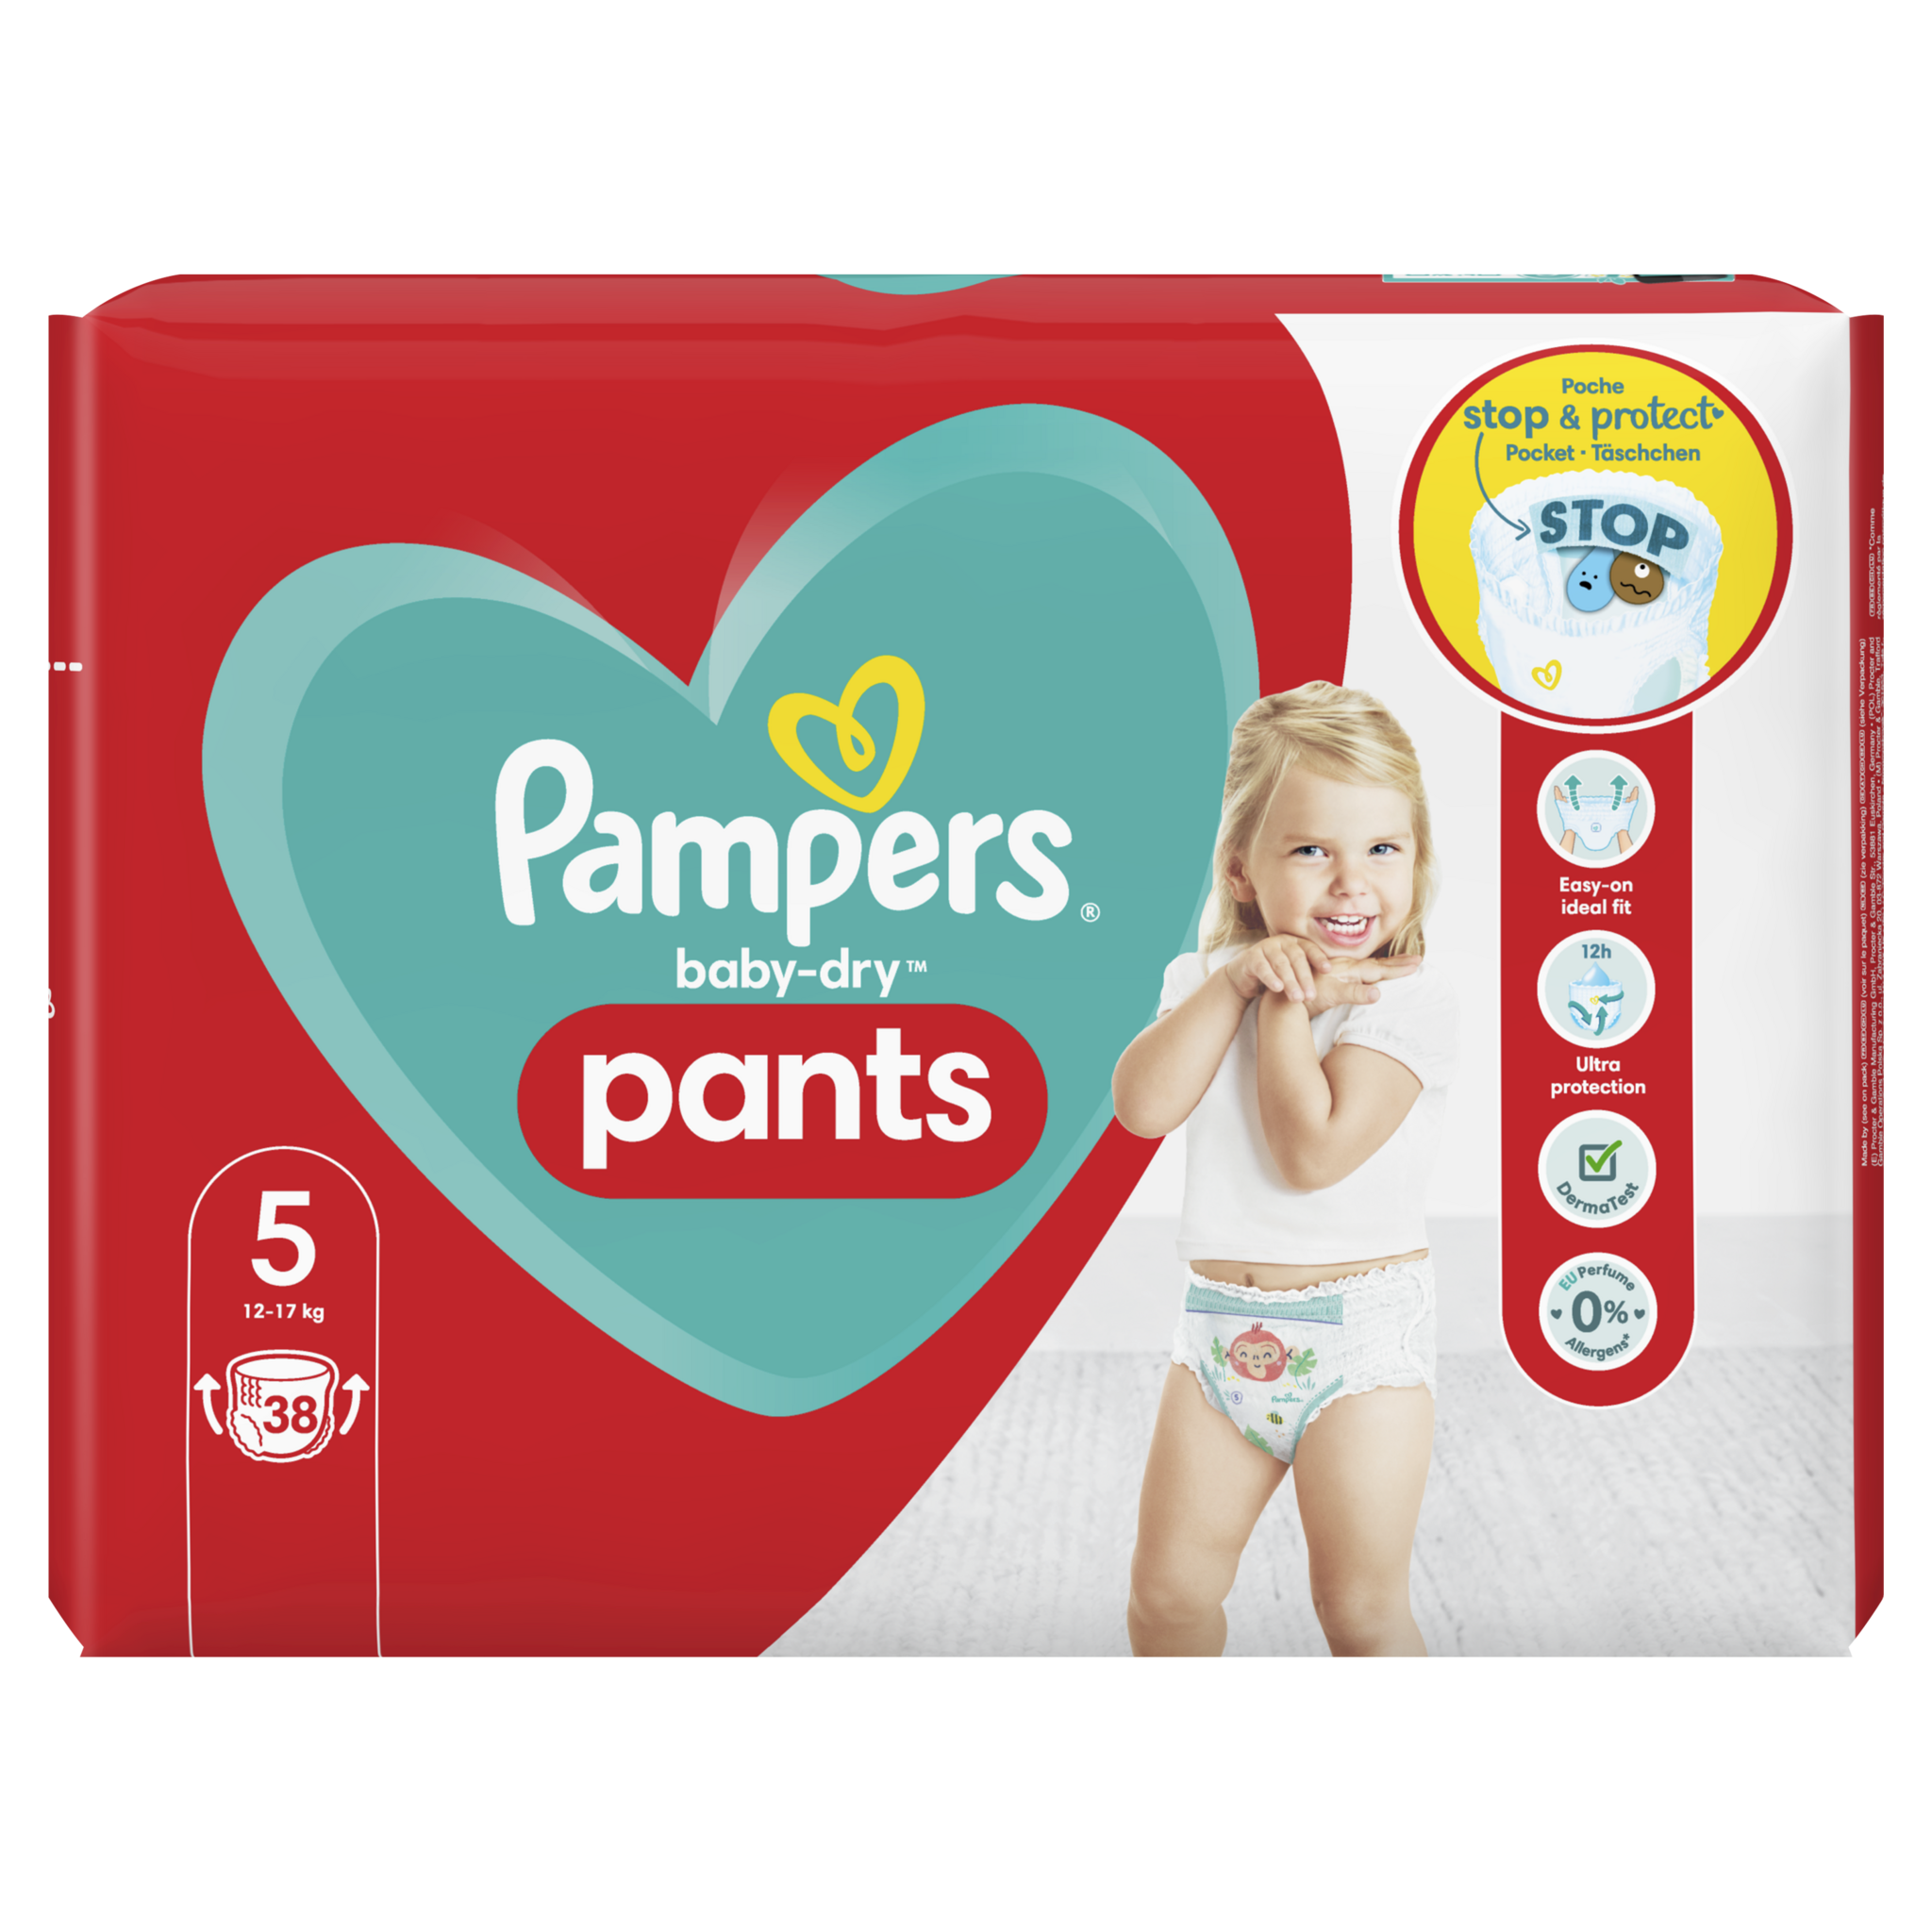 Couches-culottes PAMPERS Baby-Dry Pants Taille 4 - 23 couches-culottes